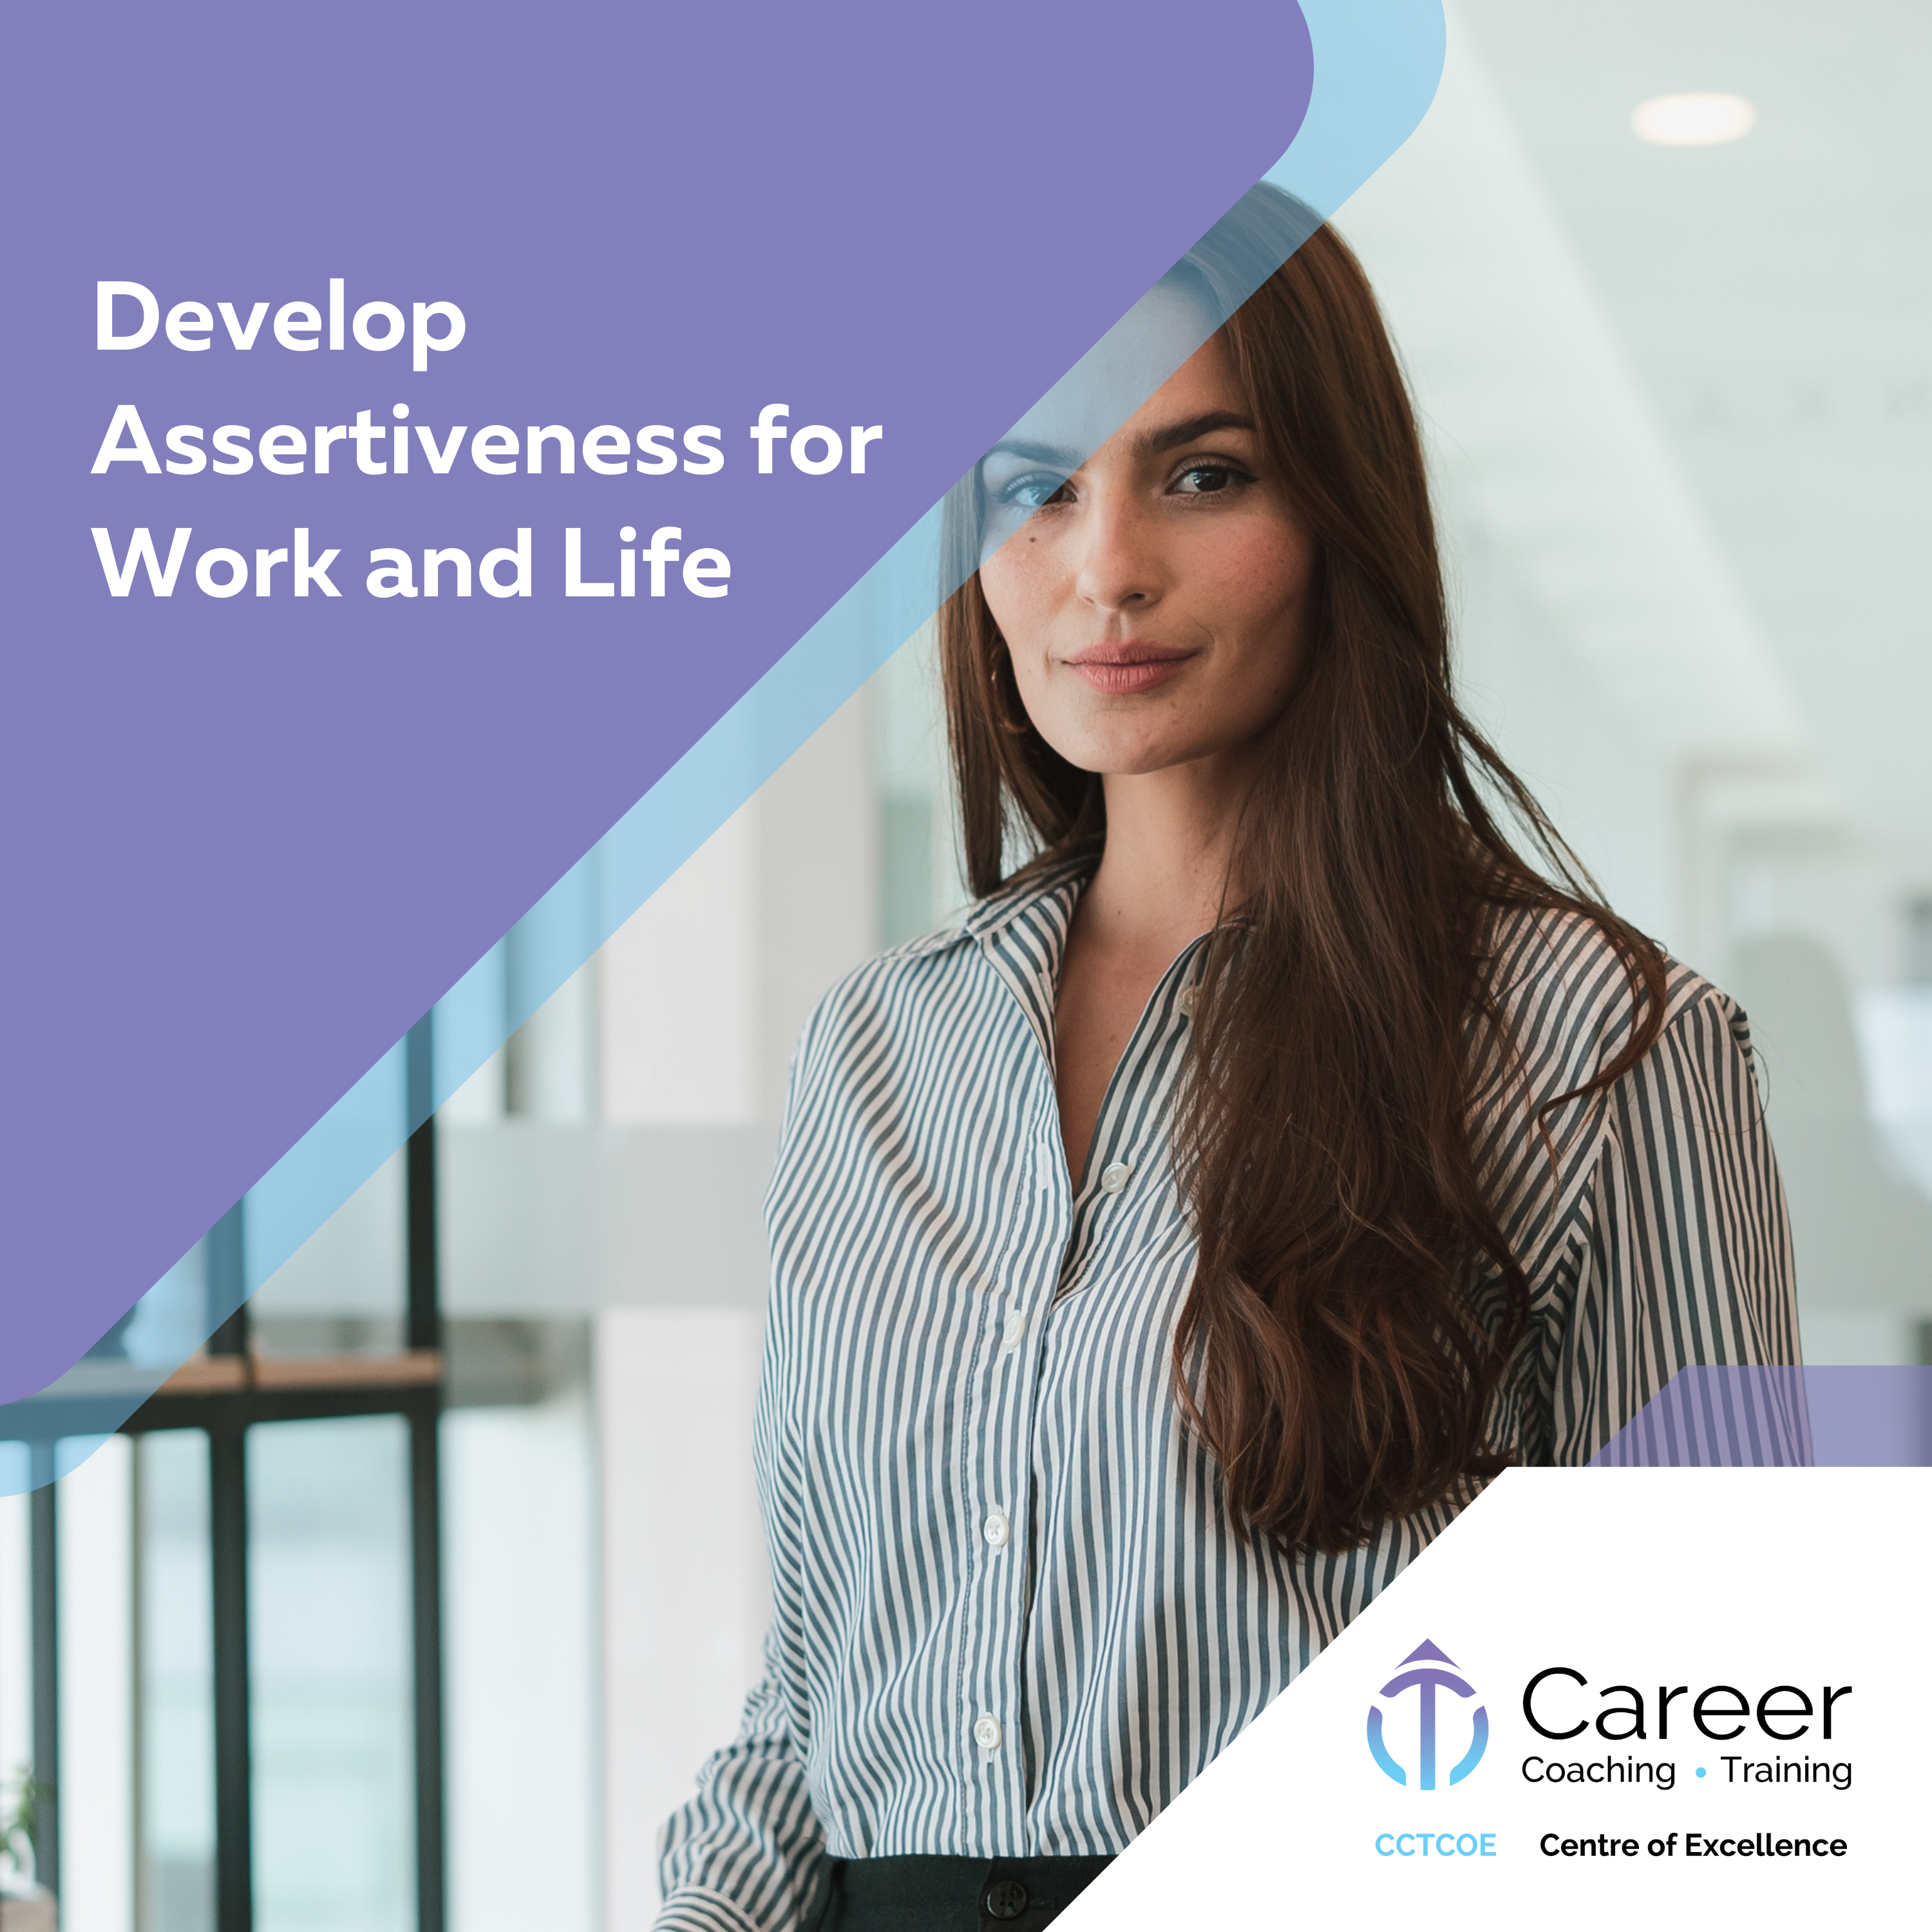 Develop Assertiveness for Work and Life